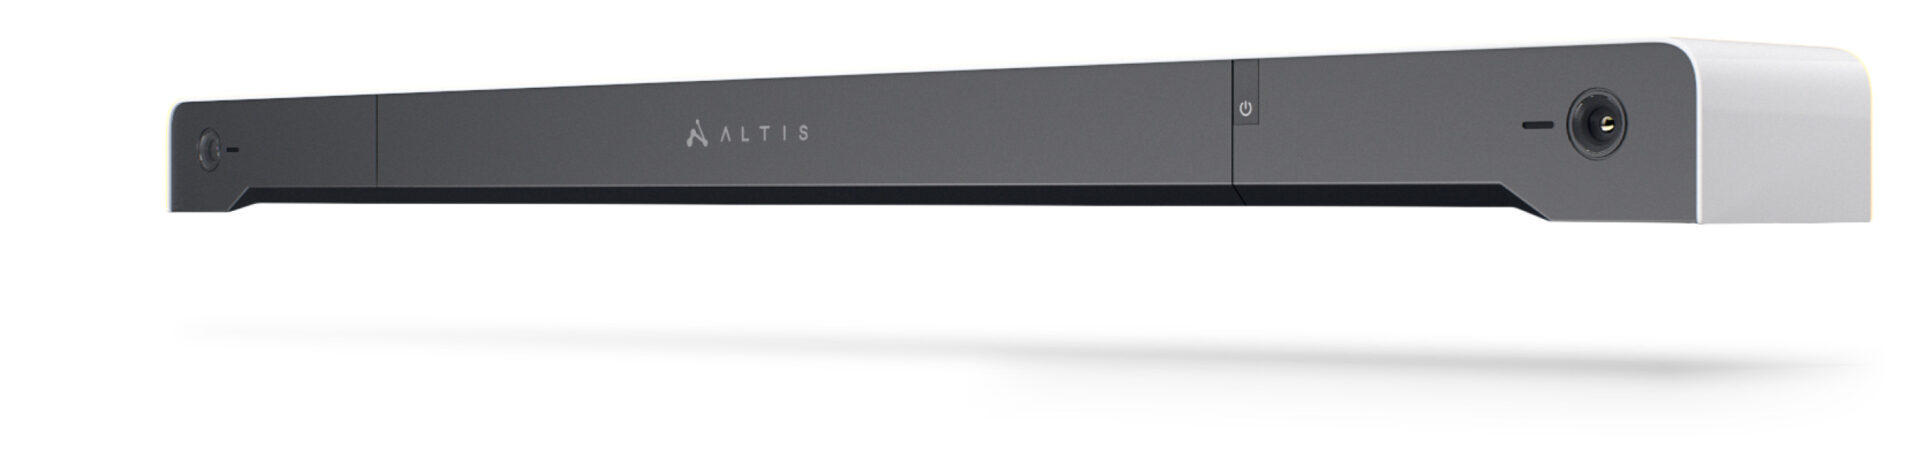 Altis Founders edition product